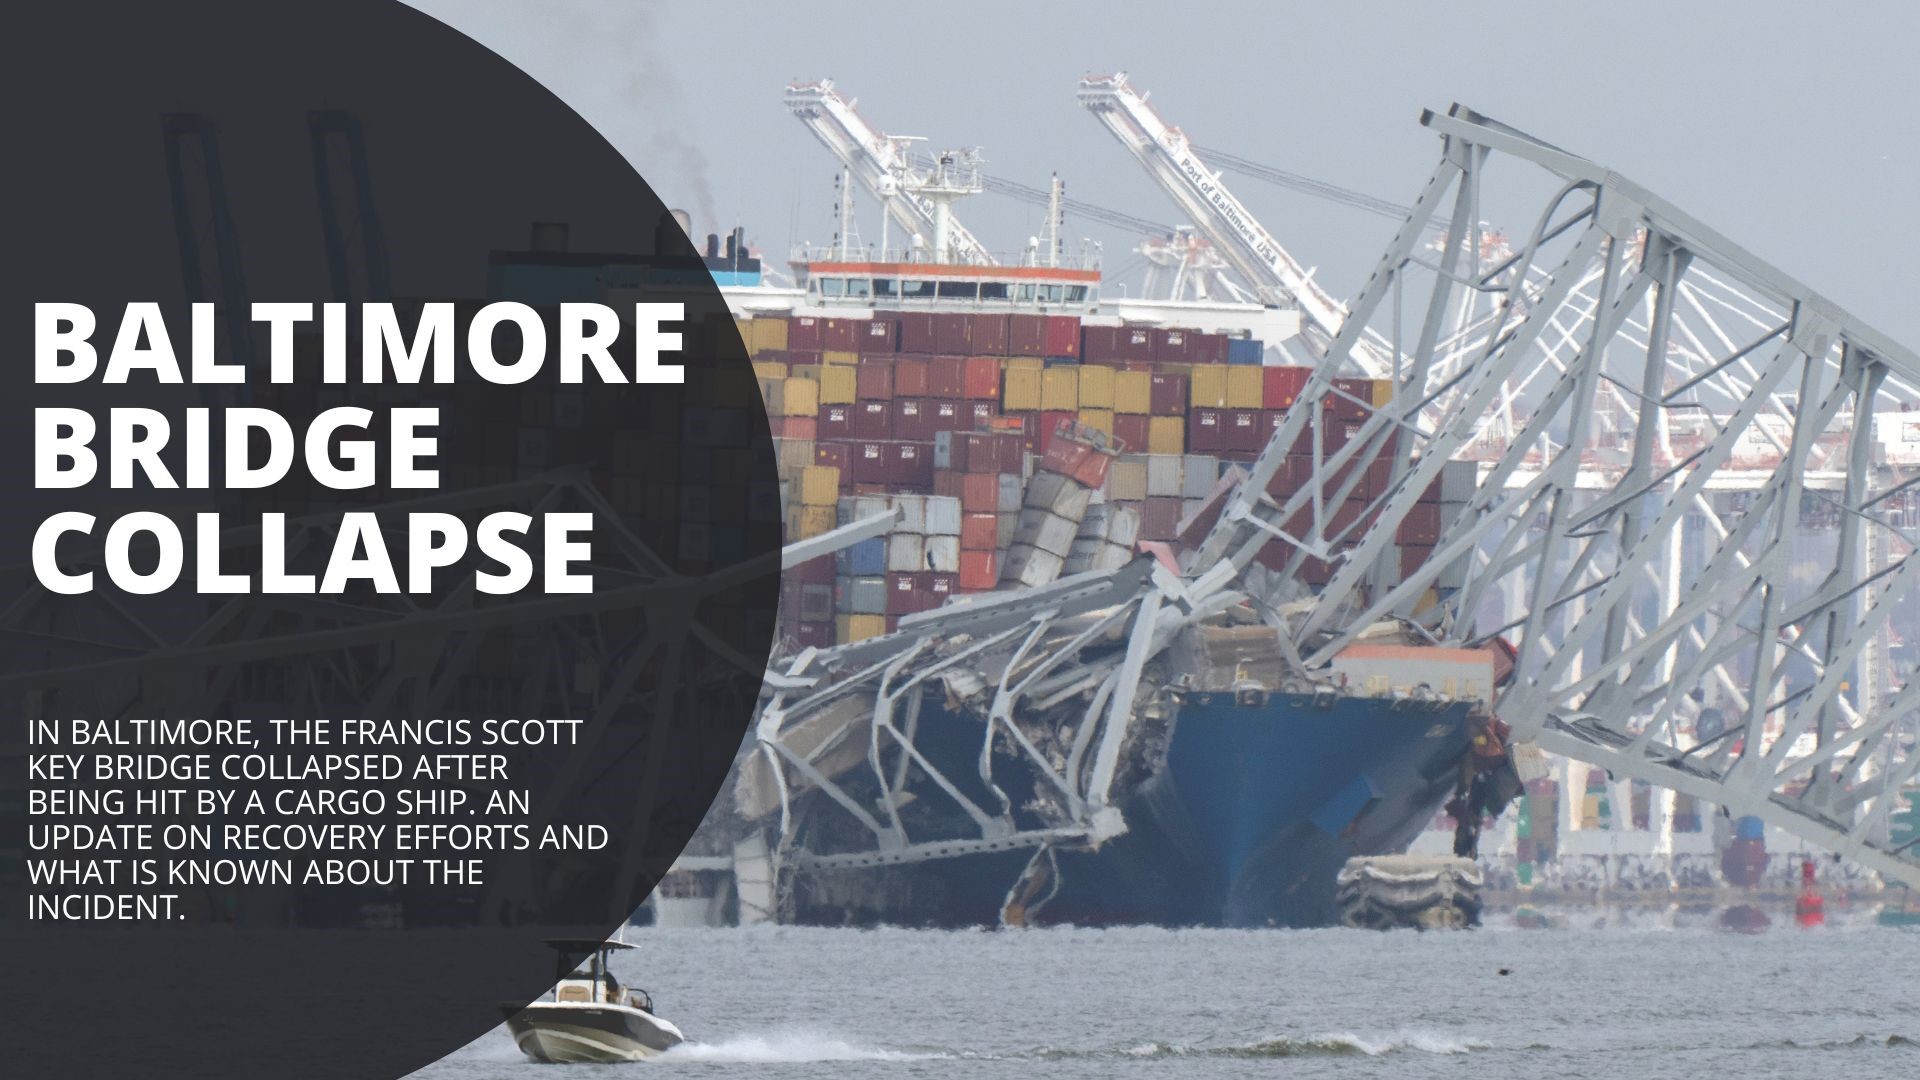 In Baltimore, the Francis Scott Key Bridge collapsed after being hit by a cargo ship. An update on recovery efforts and what is known about the incident.